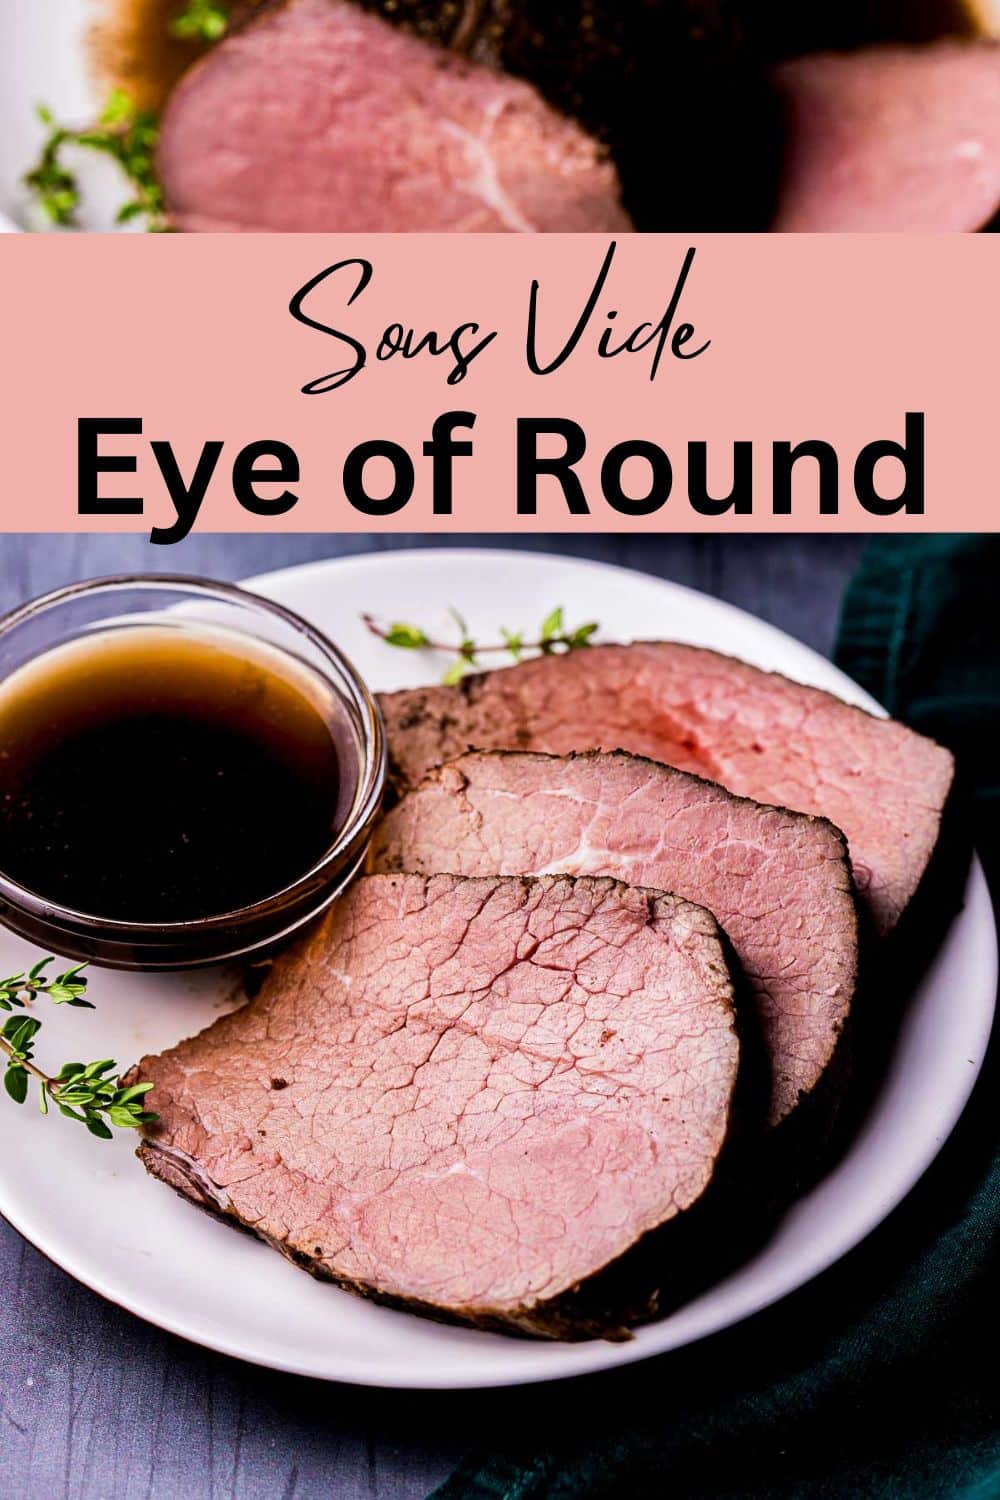 Sous Vide Eye of Round